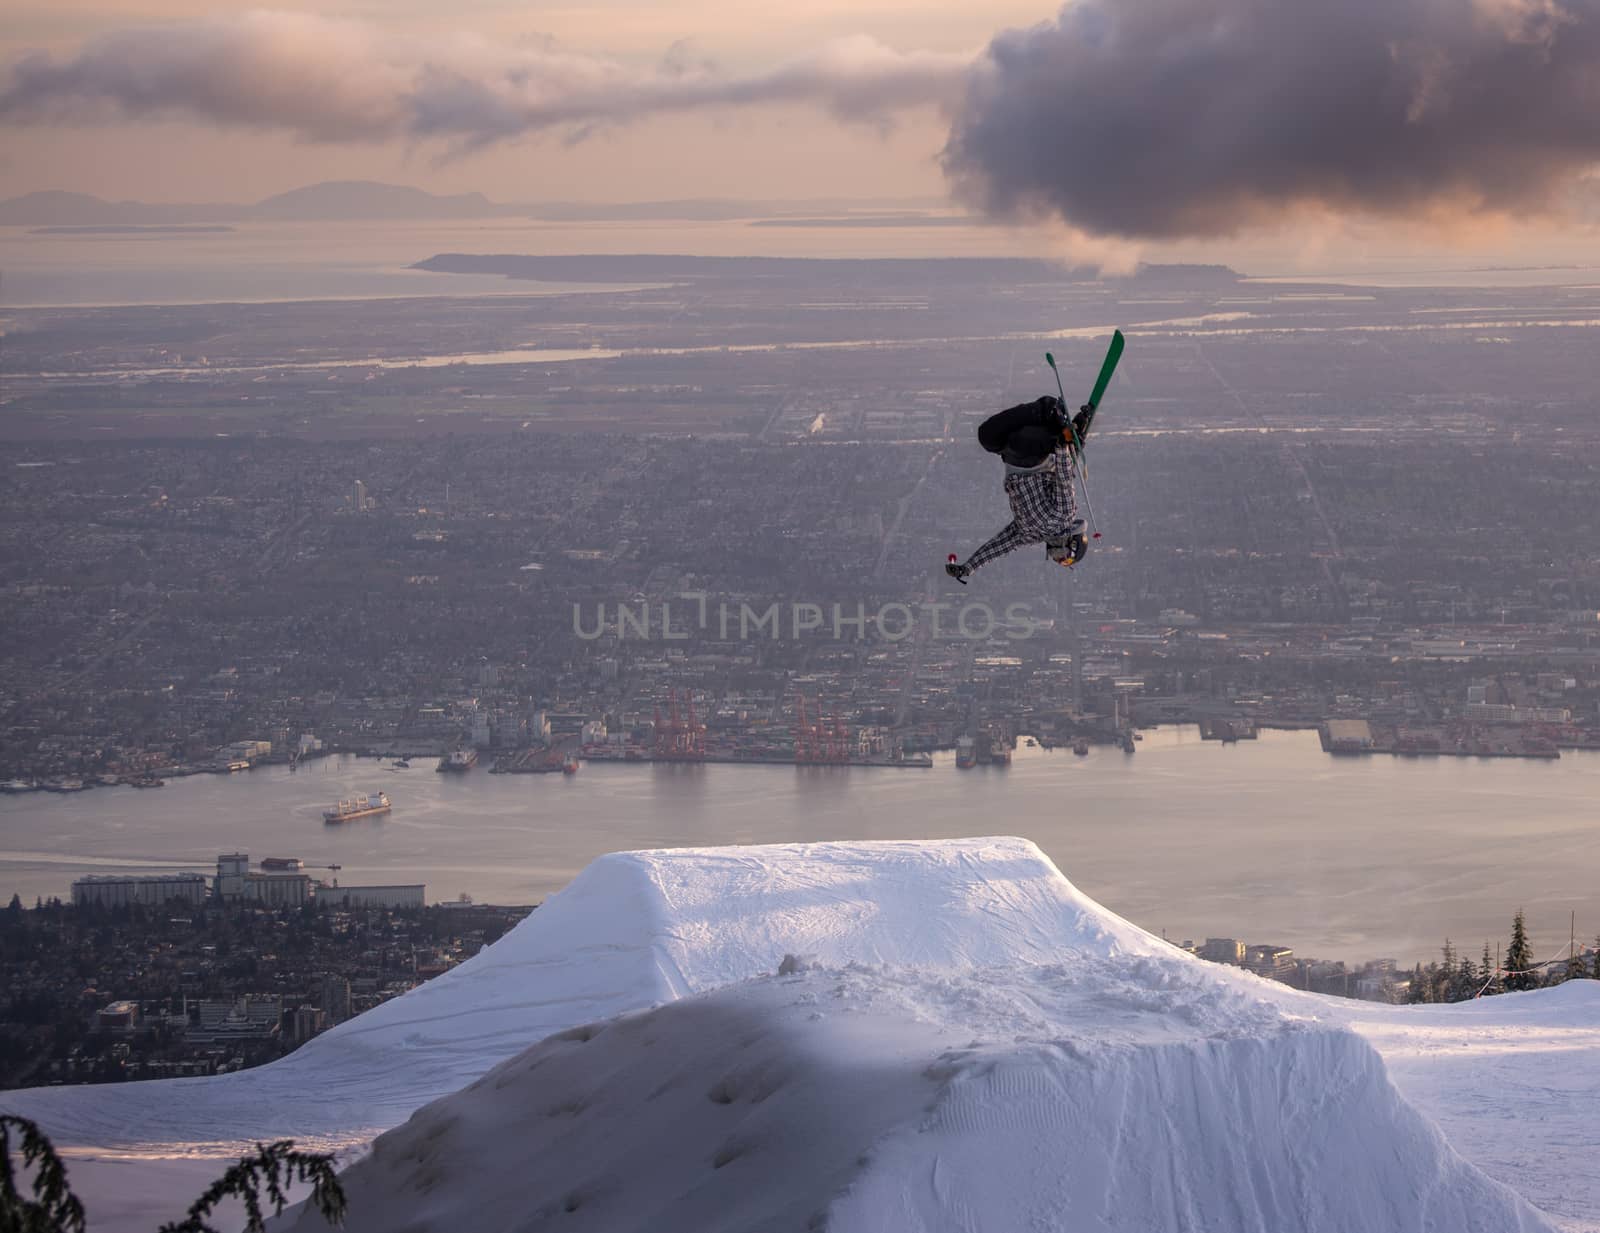 Freestyle skier performs backflip mute grab on jump above city by TSLPhoto